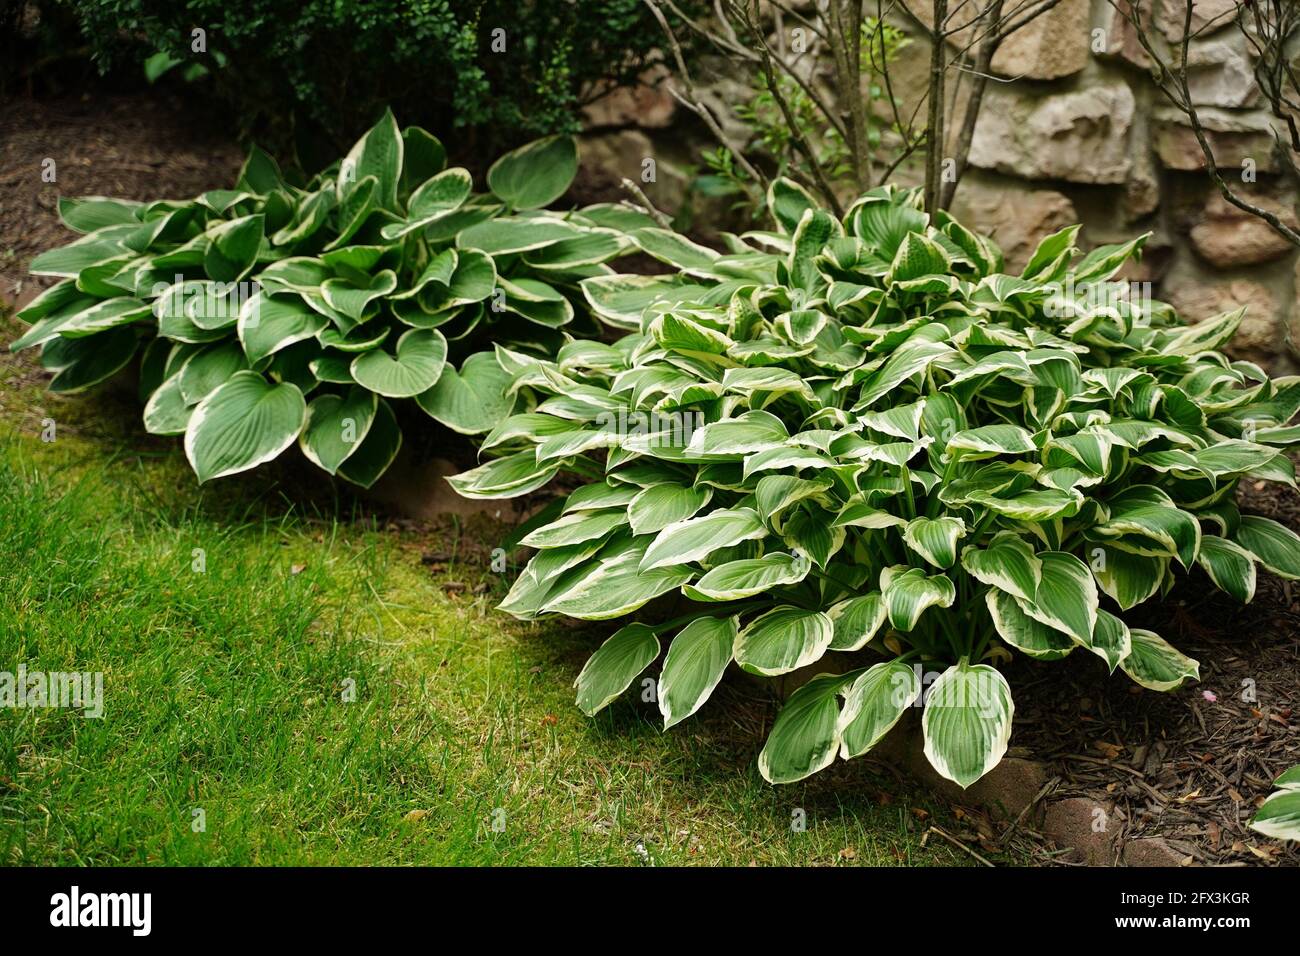 Green and white hosta plant in a garden Stock Photo